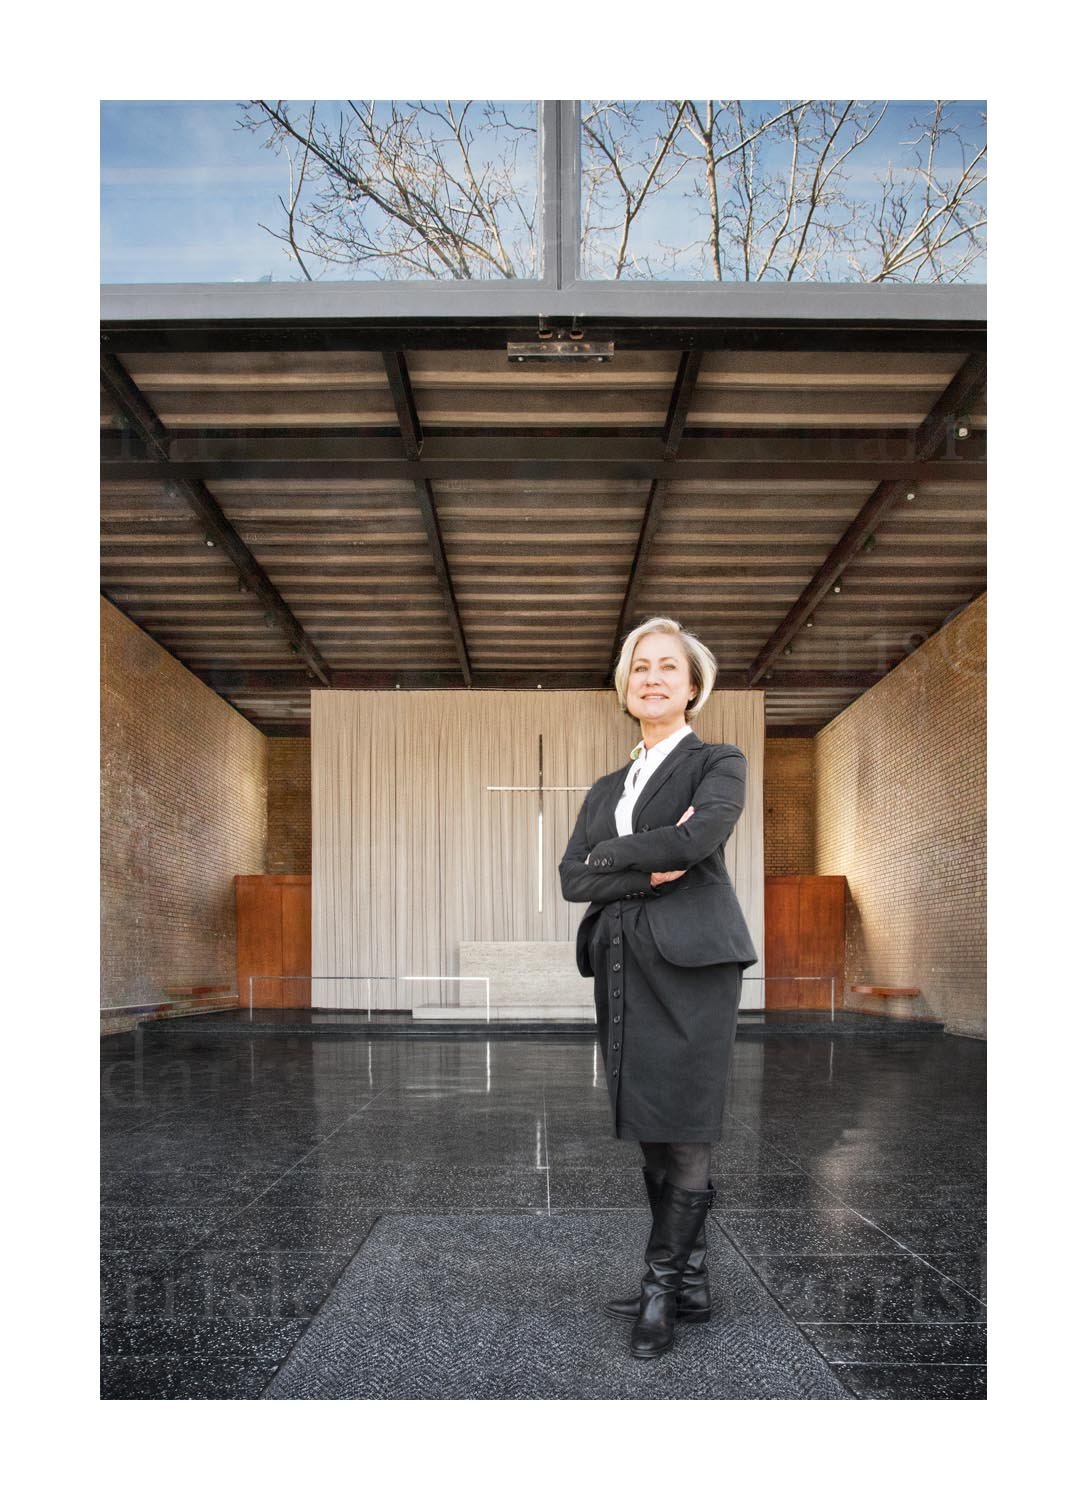  Donna Robertson, Architecture Dean at IIT, in front of Iliinois Institute of Technology Chapel. 